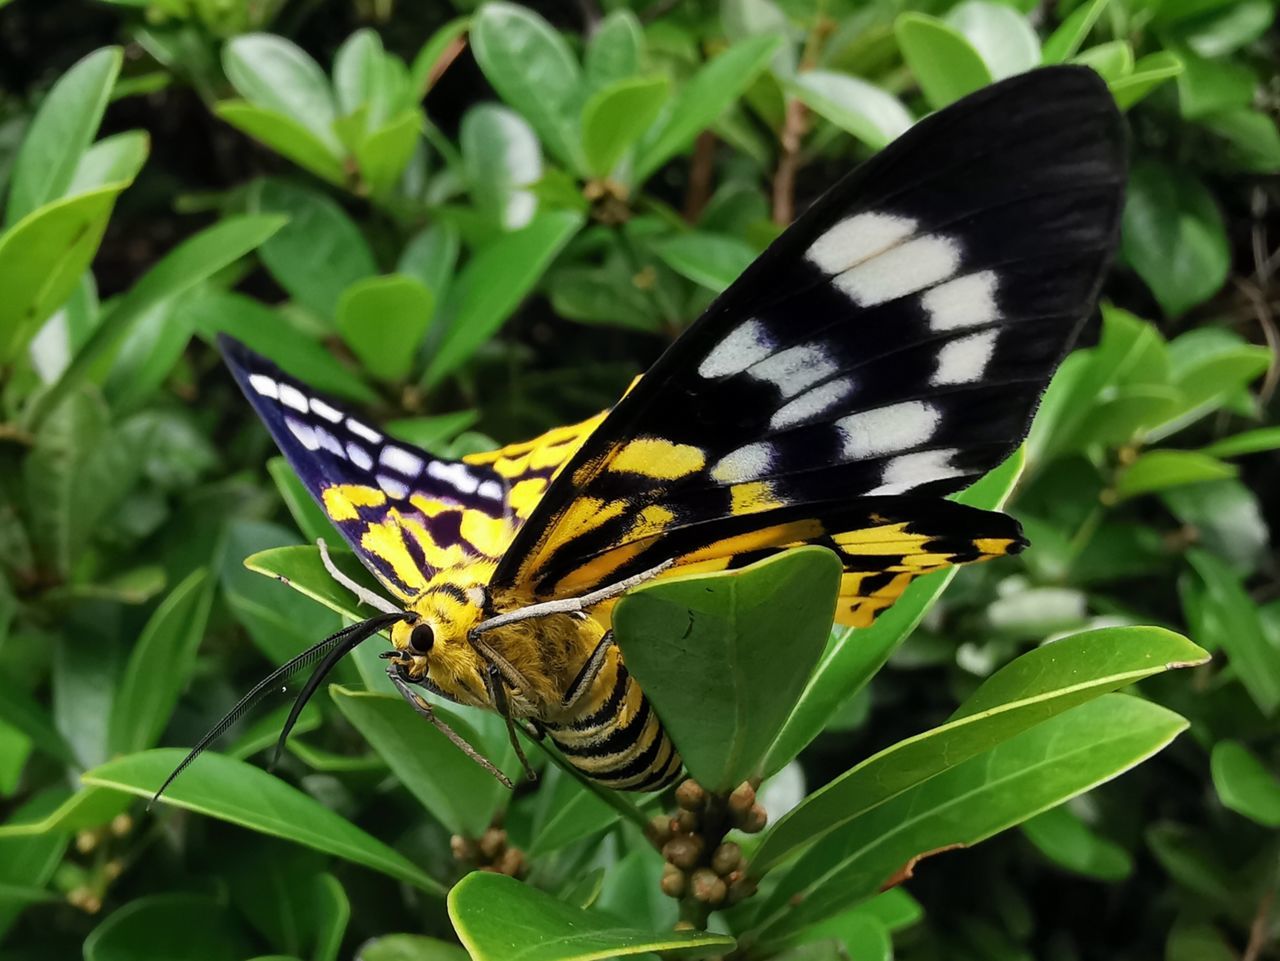 animal wildlife, animal themes, animals in the wild, one animal, animal, plant part, insect, leaf, invertebrate, beauty in nature, butterfly - insect, plant, animal wing, green color, nature, close-up, flower, day, no people, growth, outdoors, butterfly, pollination